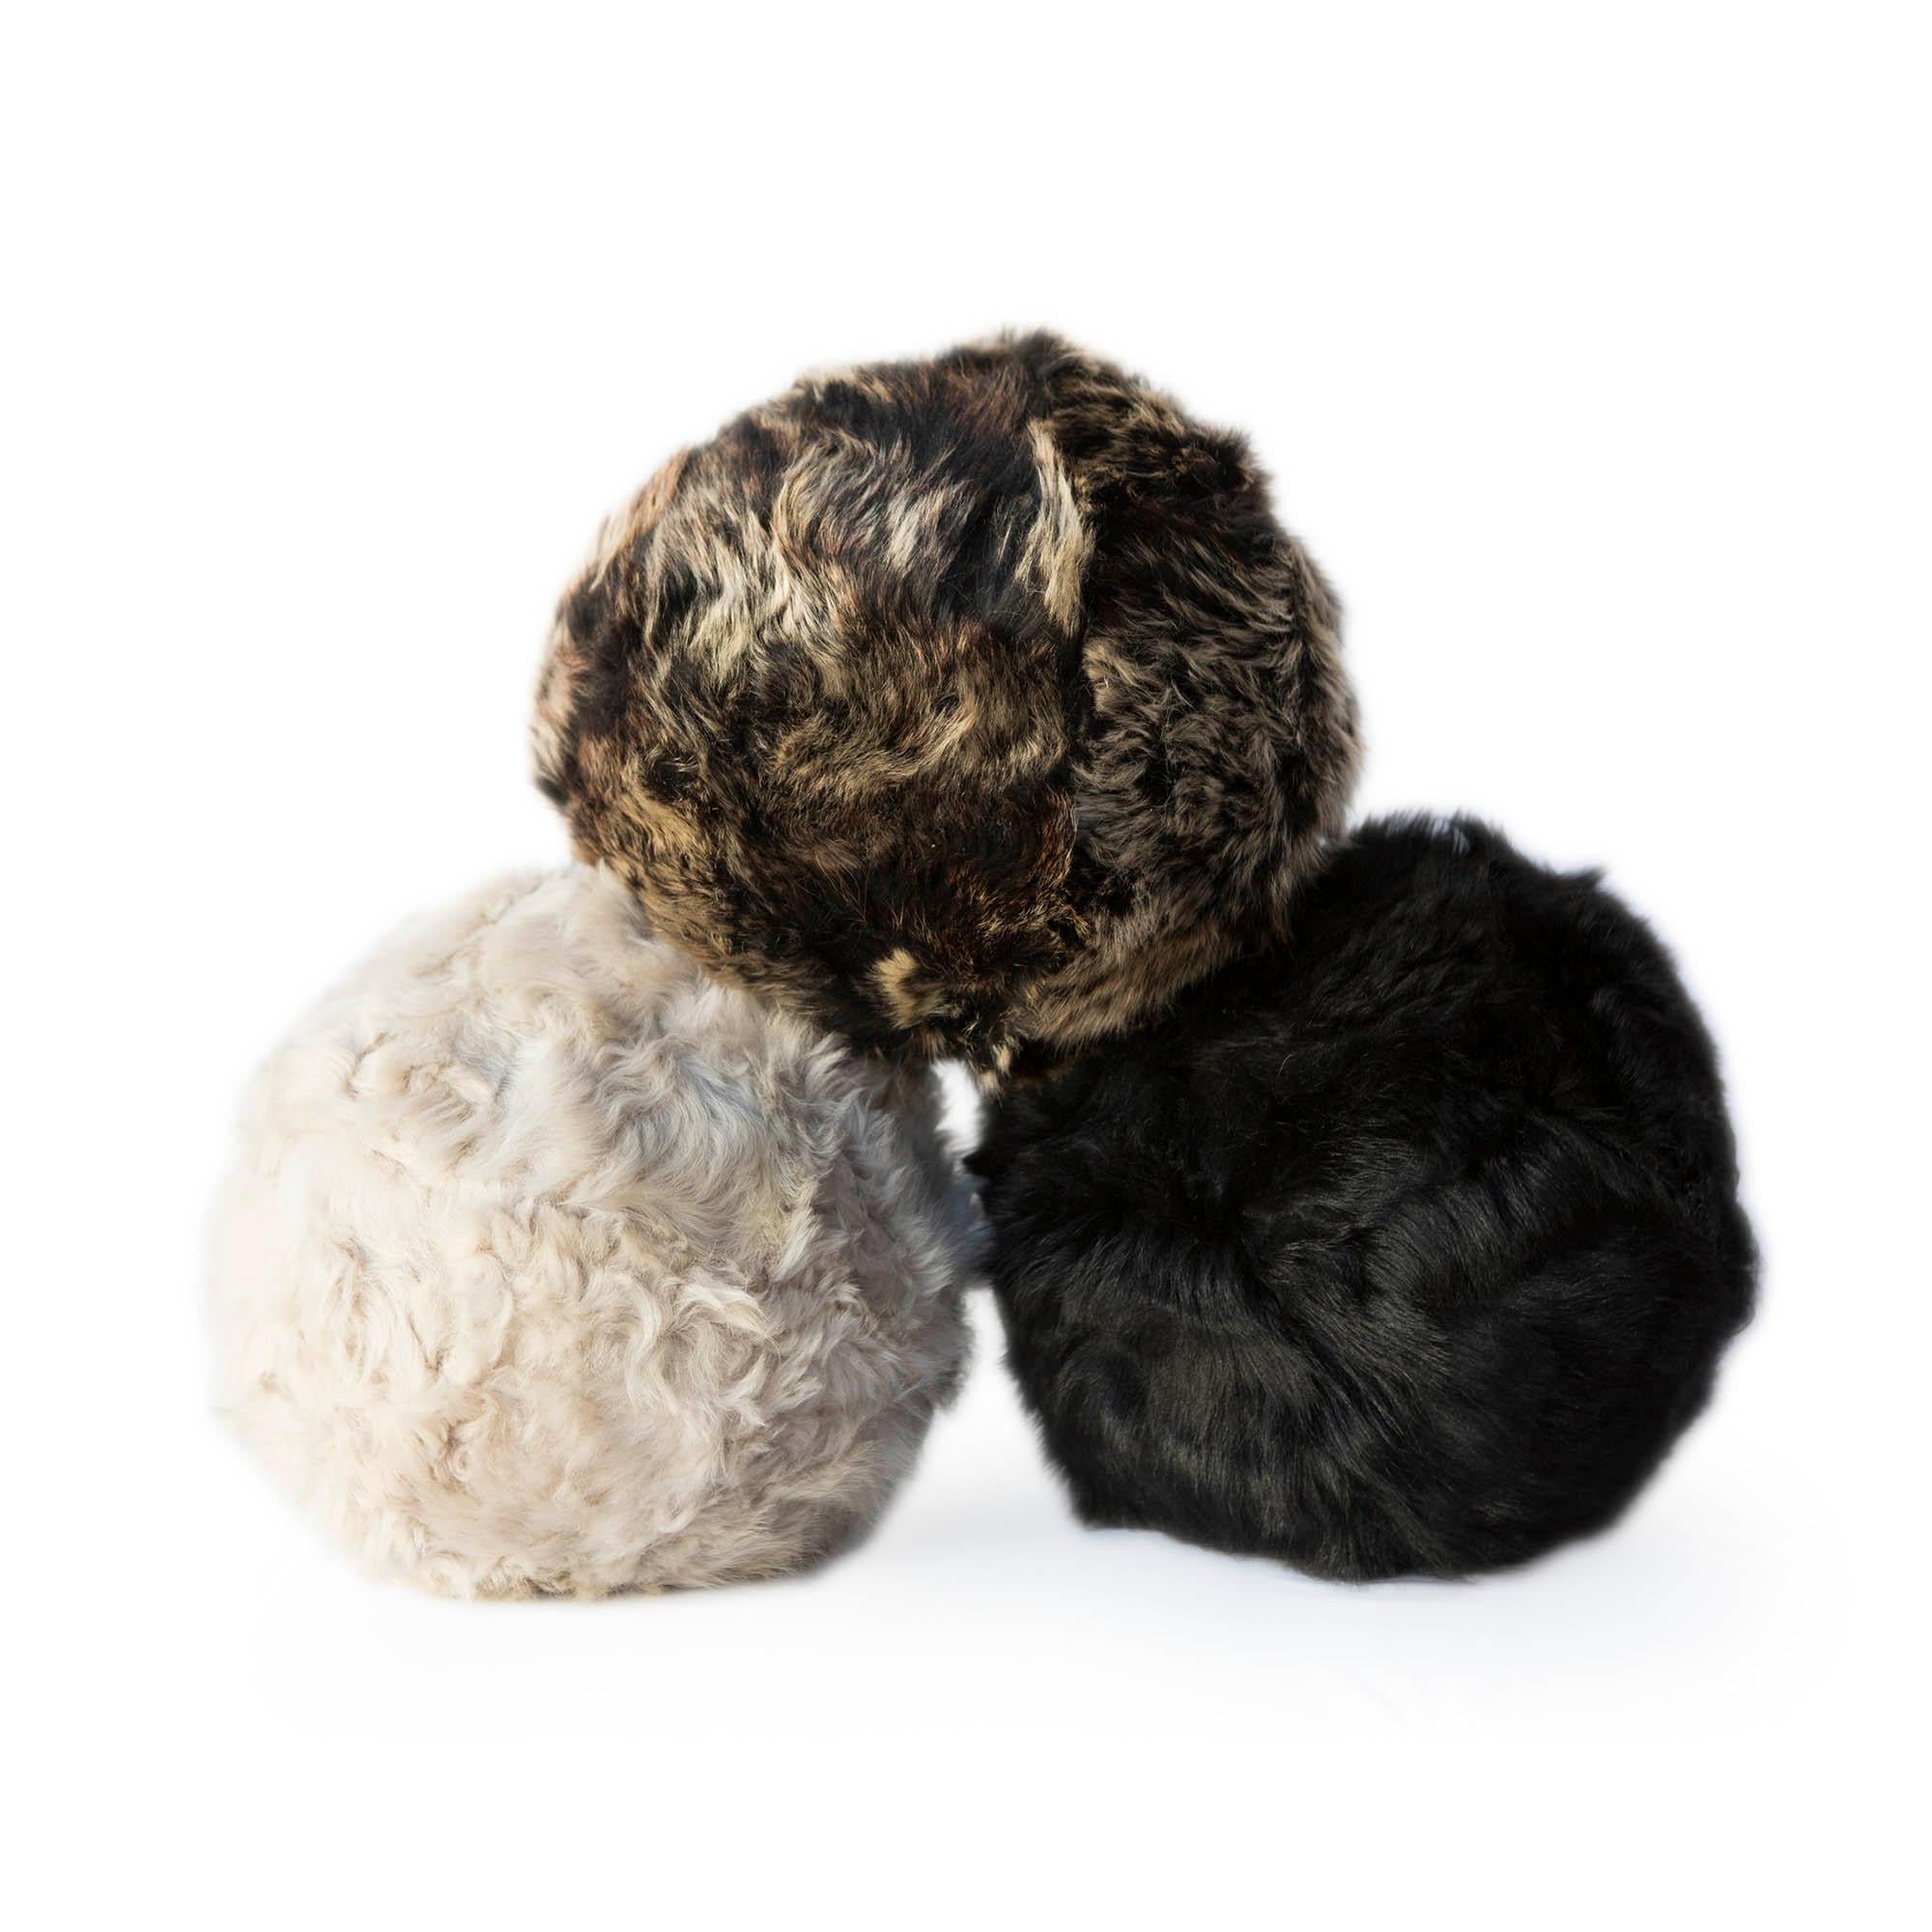 The snowball fur pillow is made from glove factory remnants we have sewn into a custom fabric to provide sustainable, 